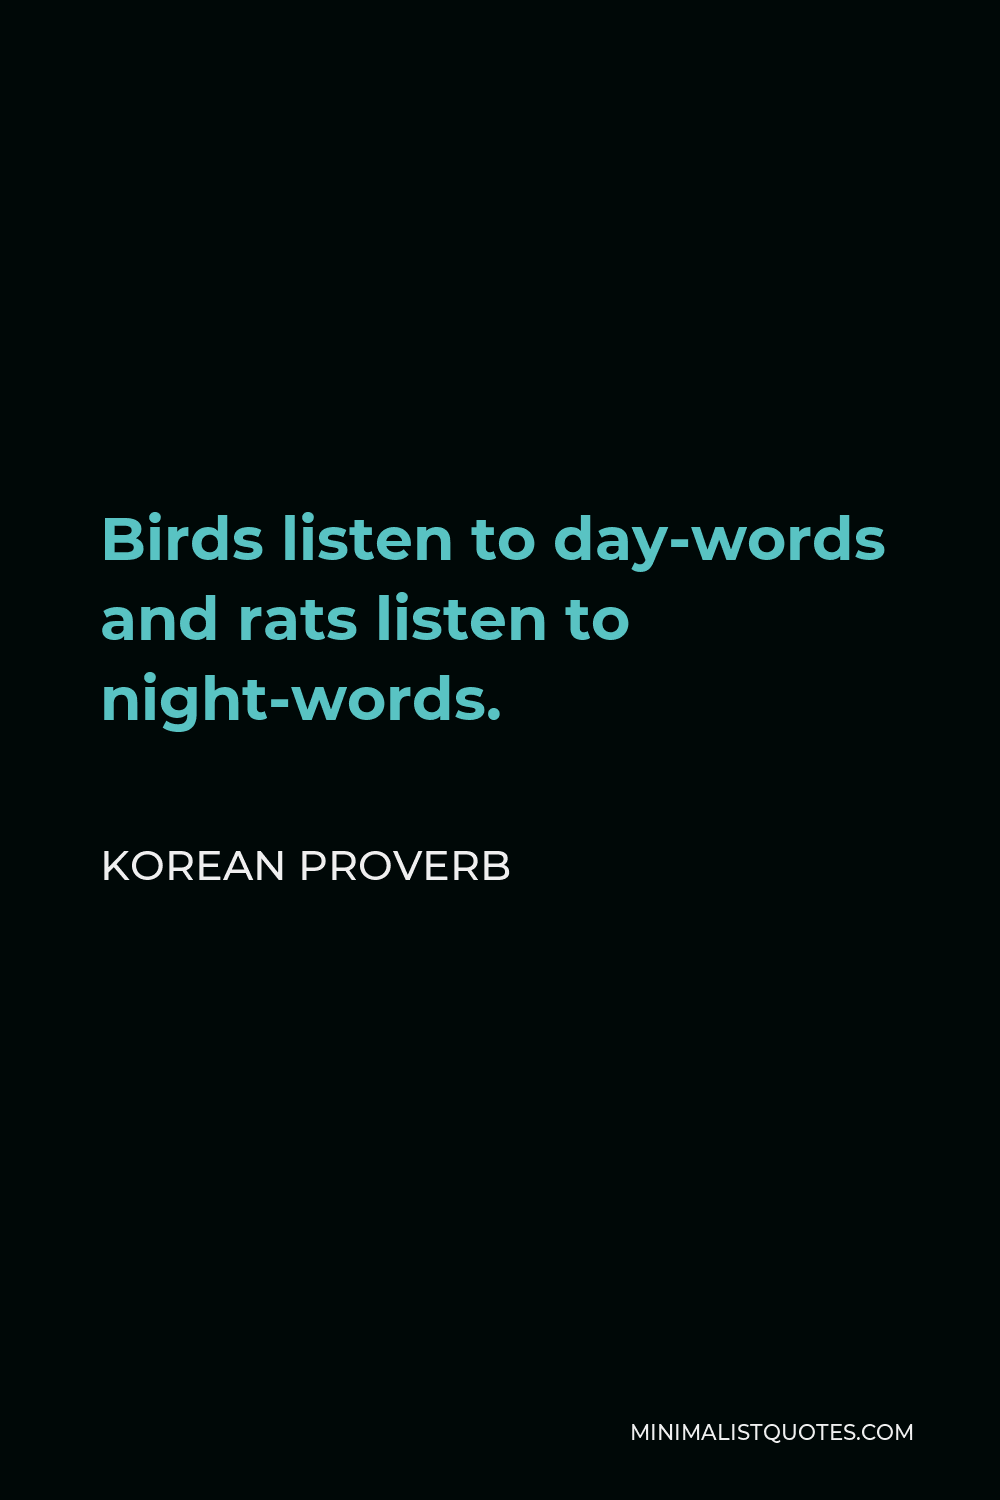 Korean Proverb Quote - Birds listen to day-words and rats listen to night-words.